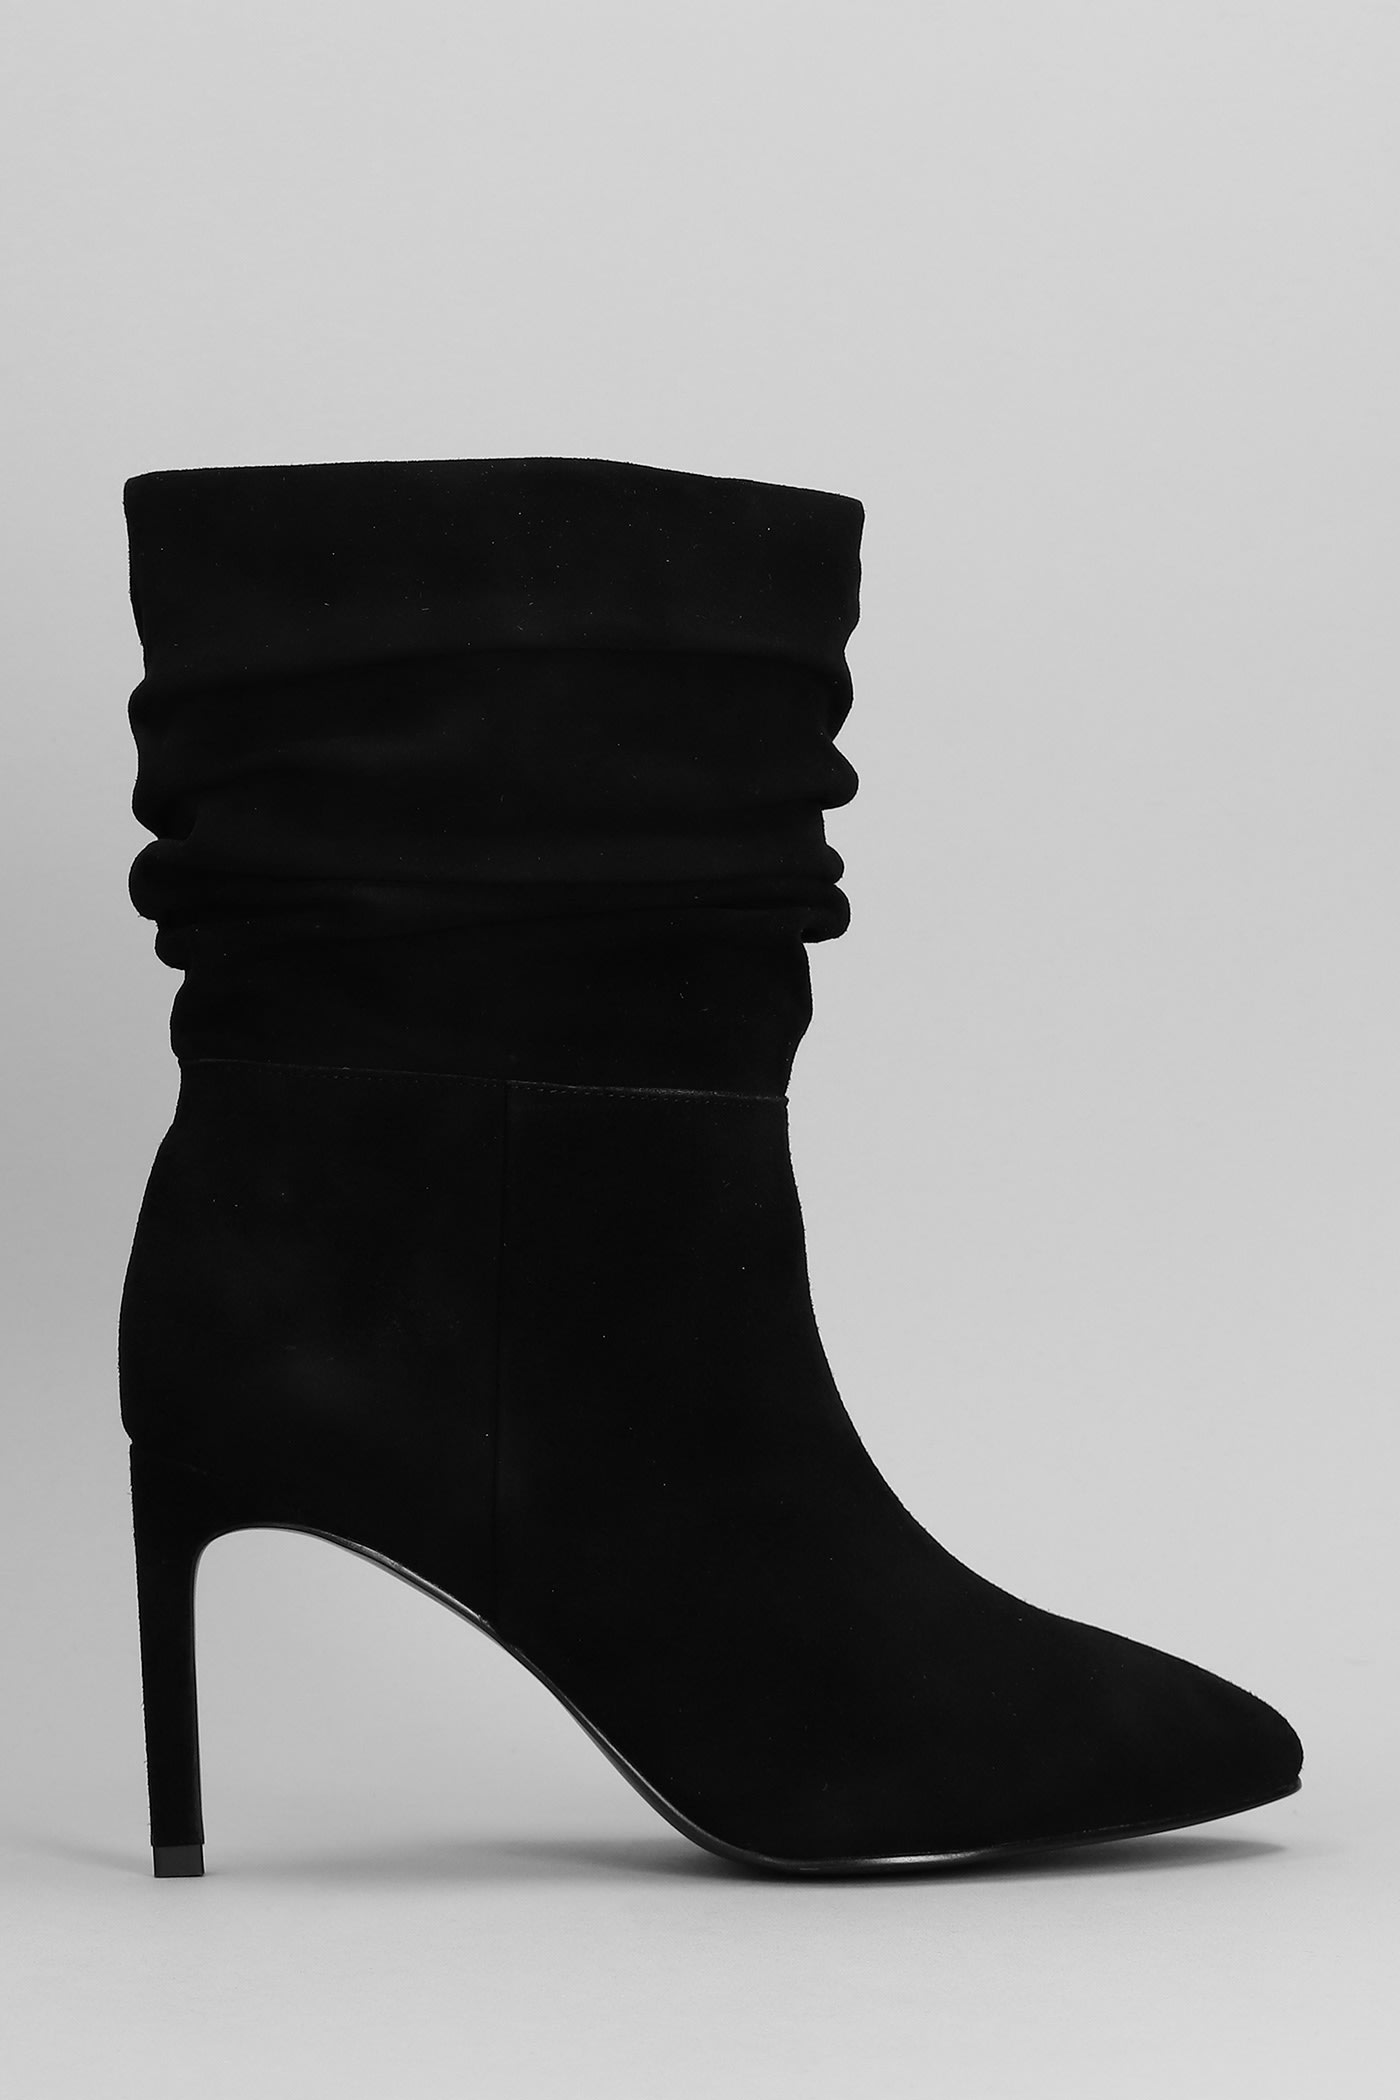 BIBI LOU HIGH HEELS ANKLE BOOTS IN BLACK SUEDE